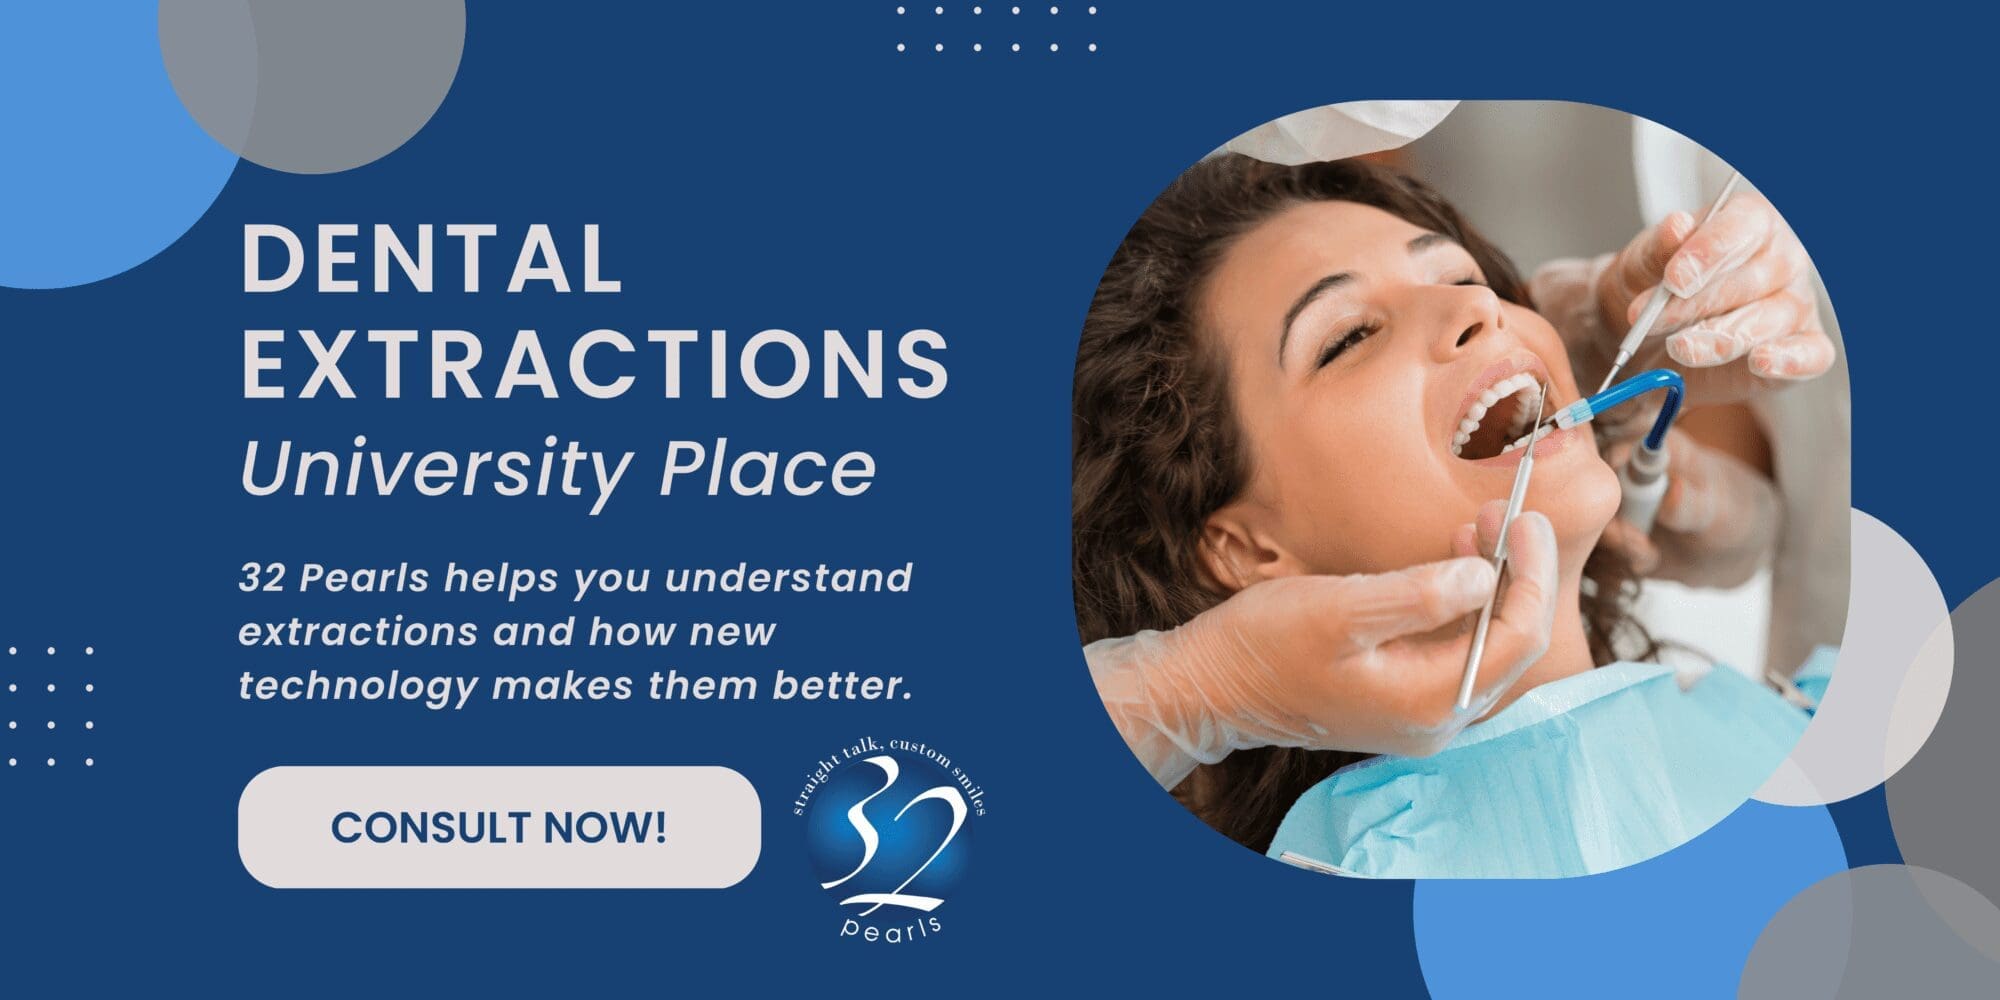 Dental Extractions - University Place